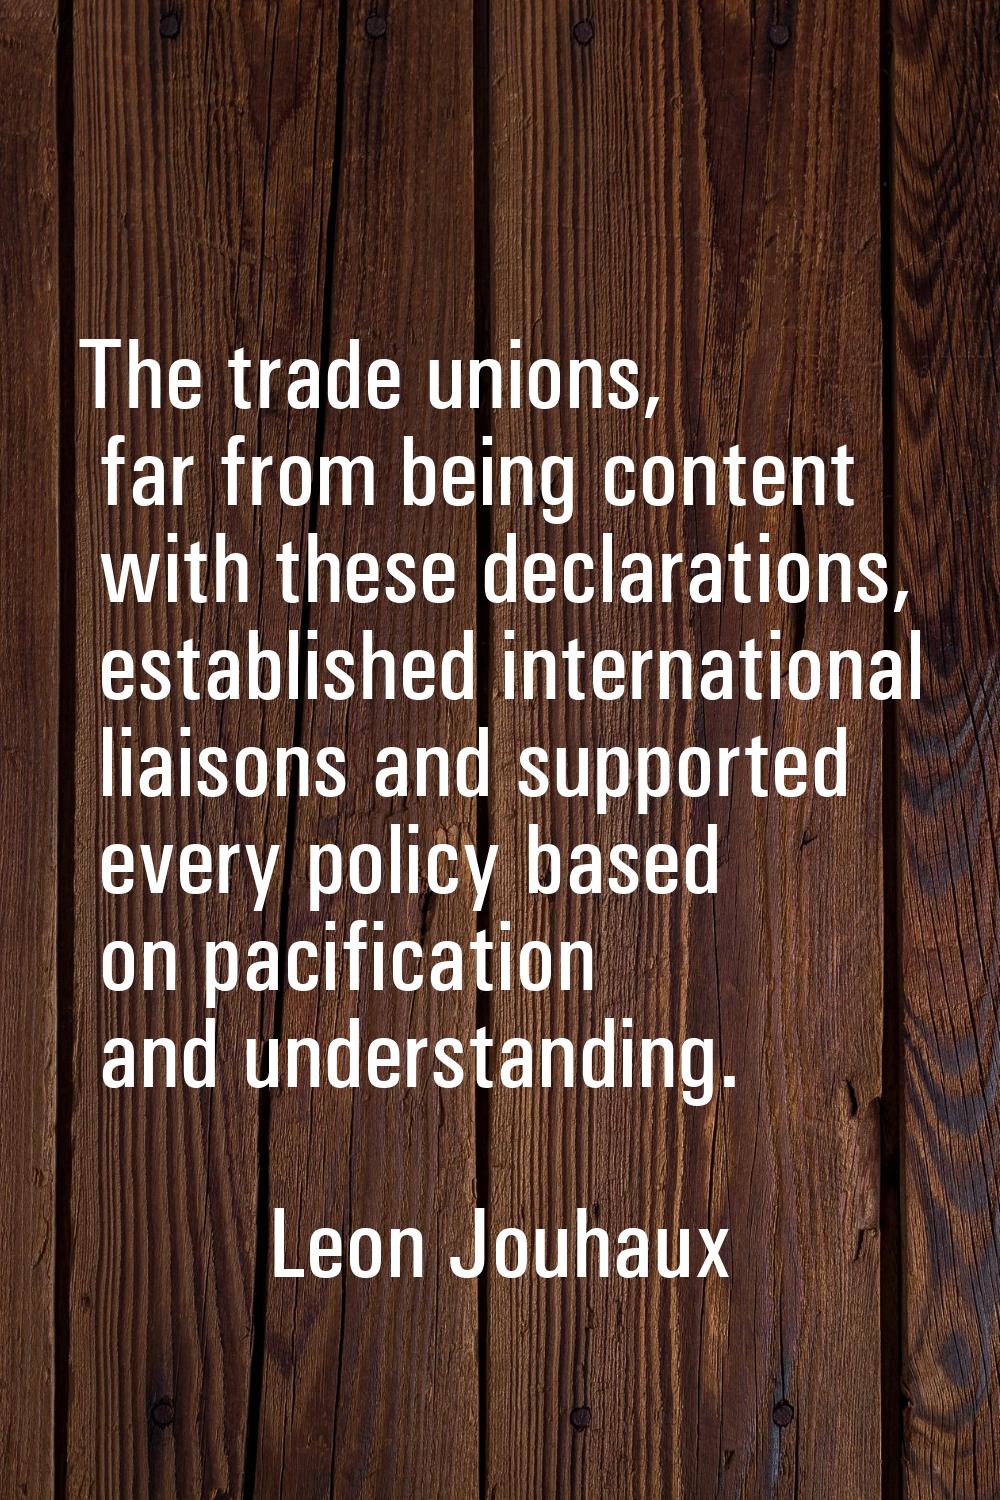 The trade unions, far from being content with these declarations, established international liaison